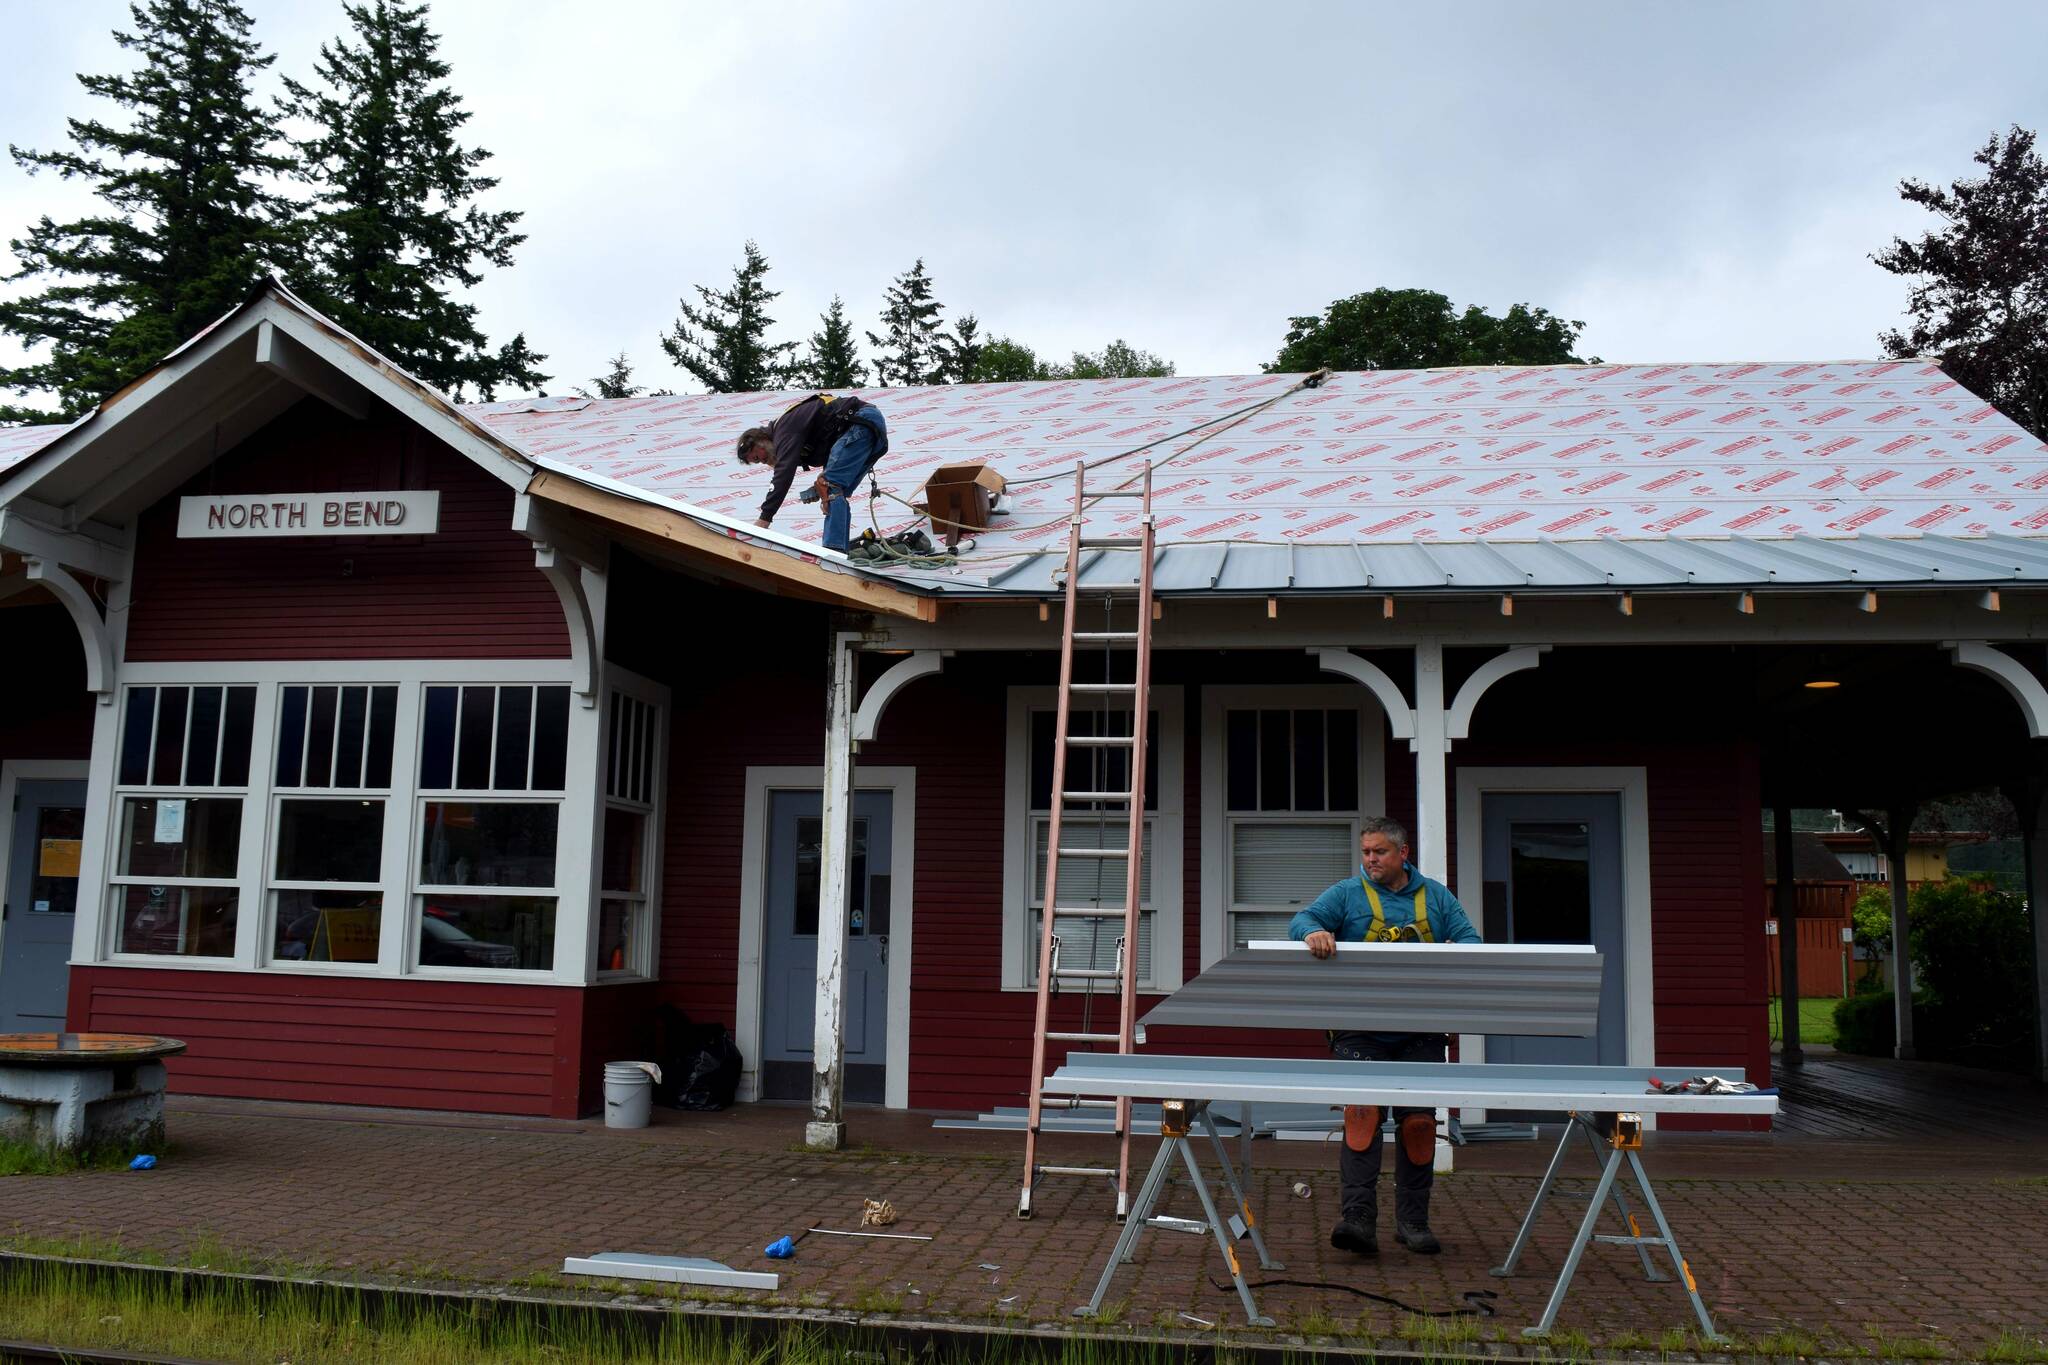 The North Bend Train Depot on June 17. File photo by Conor Wilson/Valley Record